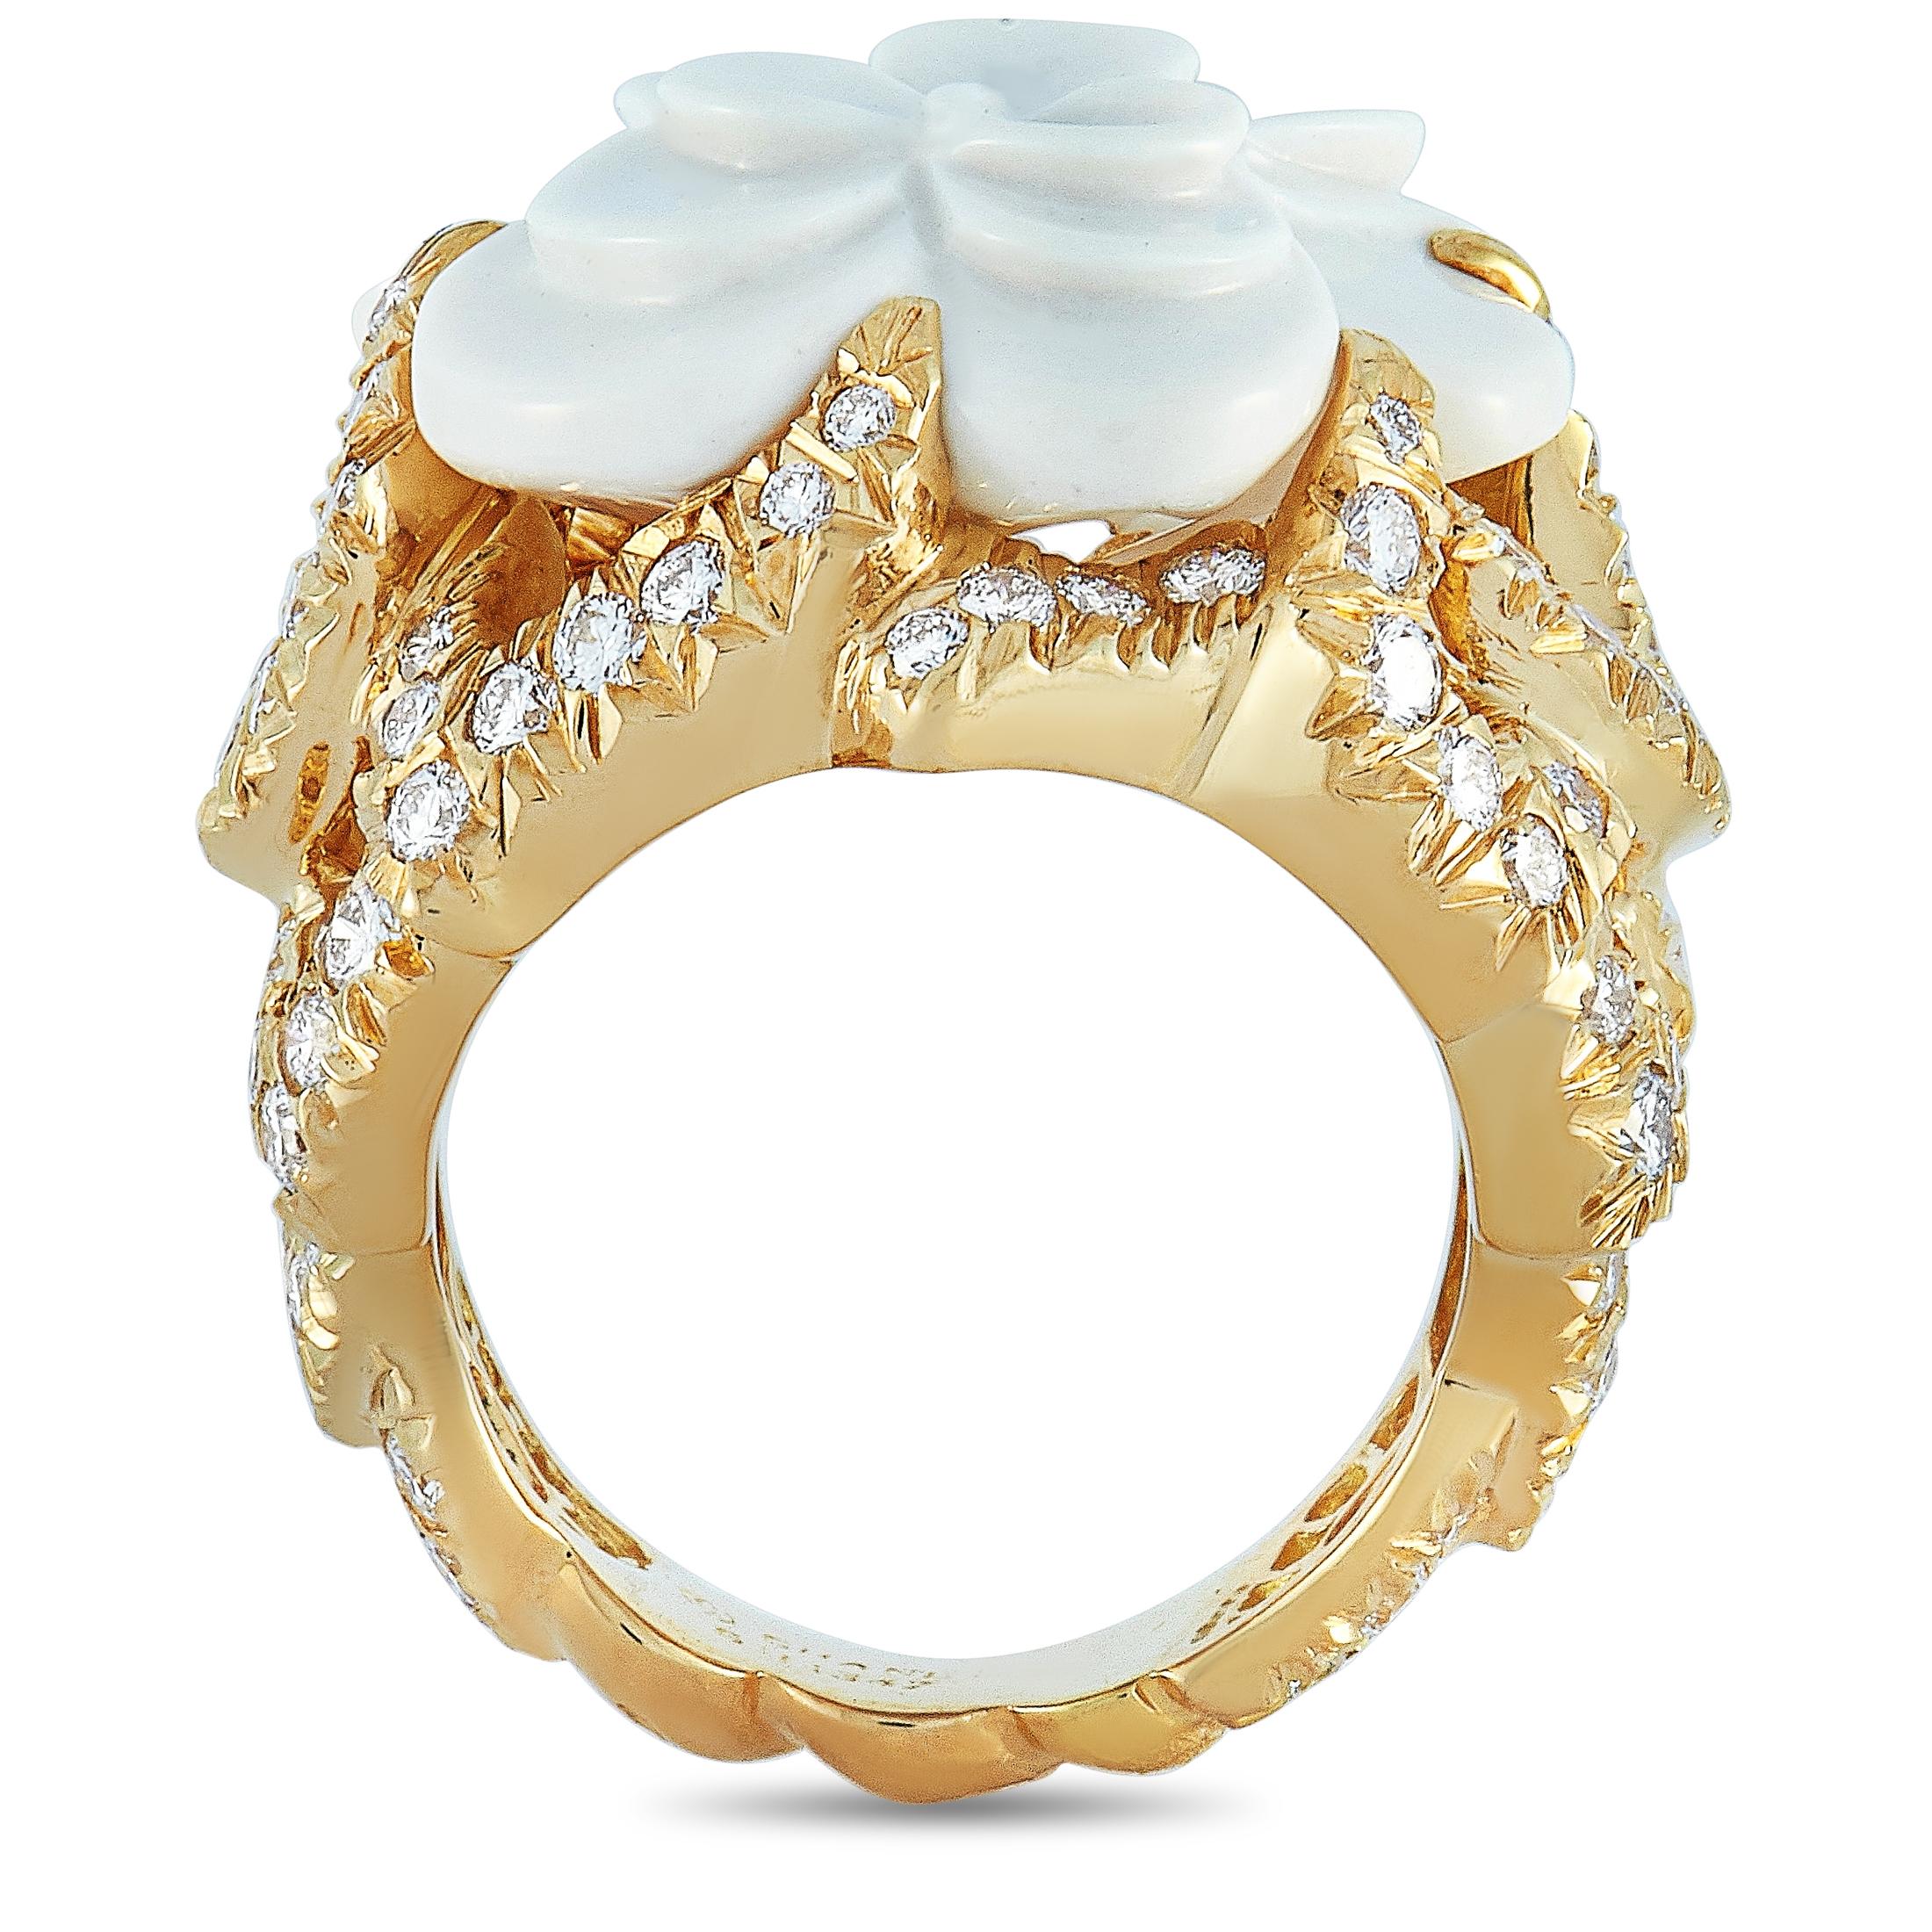 The Chanel “Camélia” ring is made out of 18K yellow gold and ceramic and weighs 21.7 grams. It is embellished with diamonds that feature grade F color and VS1 clarity and amount to approximately 3.00 carats. The ring boasts band thickness of 4 mm